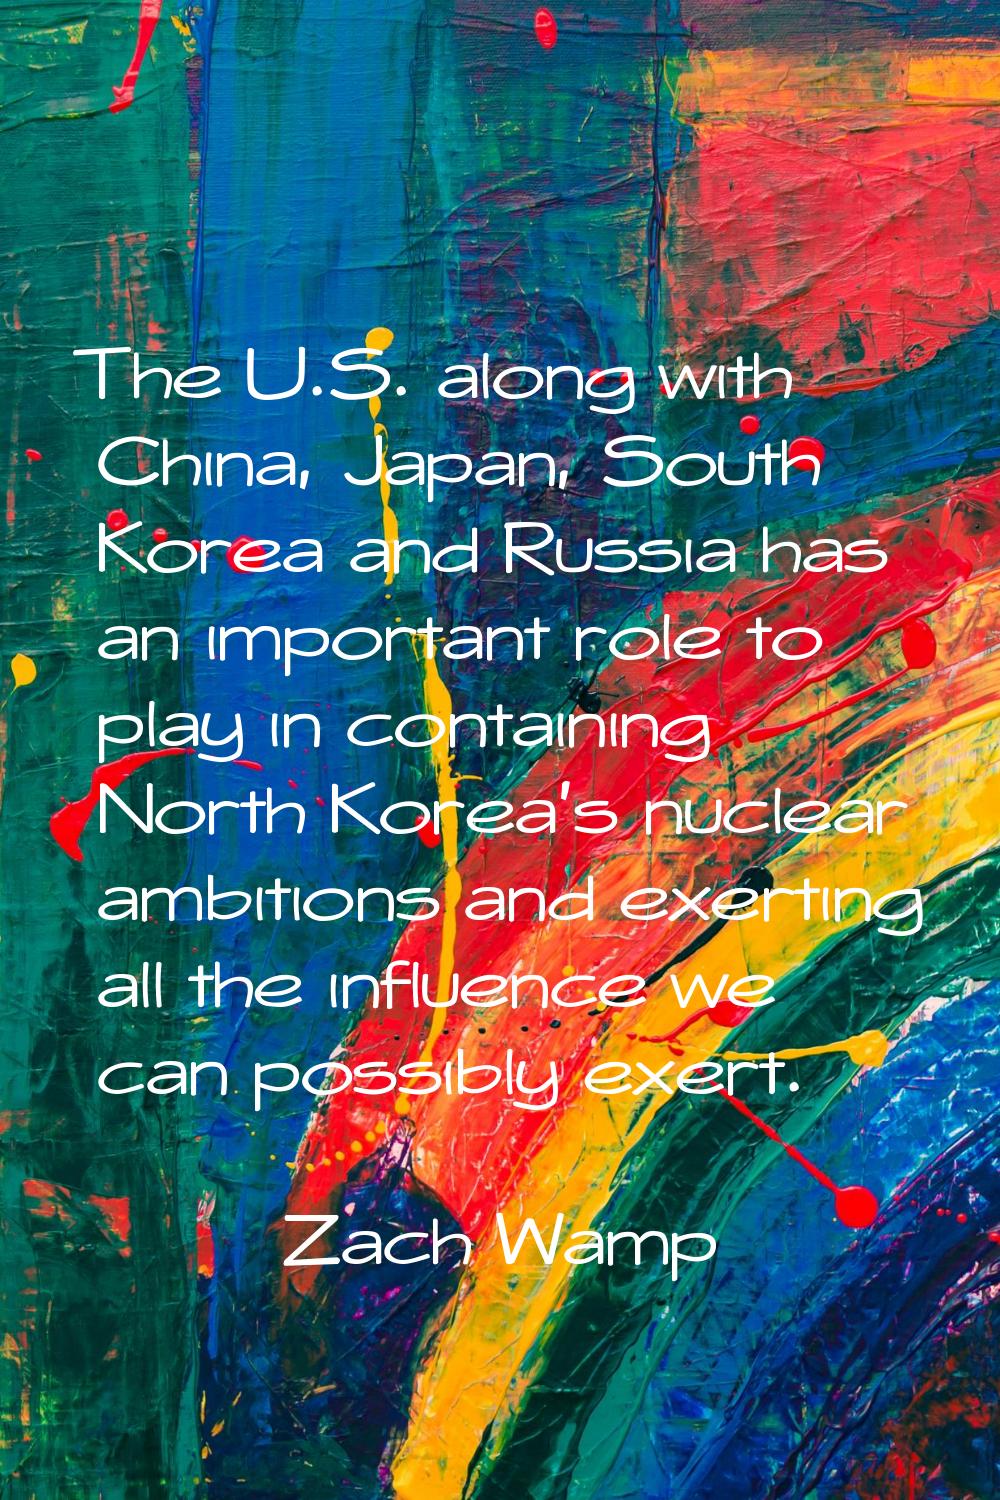 The U.S. along with China, Japan, South Korea and Russia has an important role to play in containin